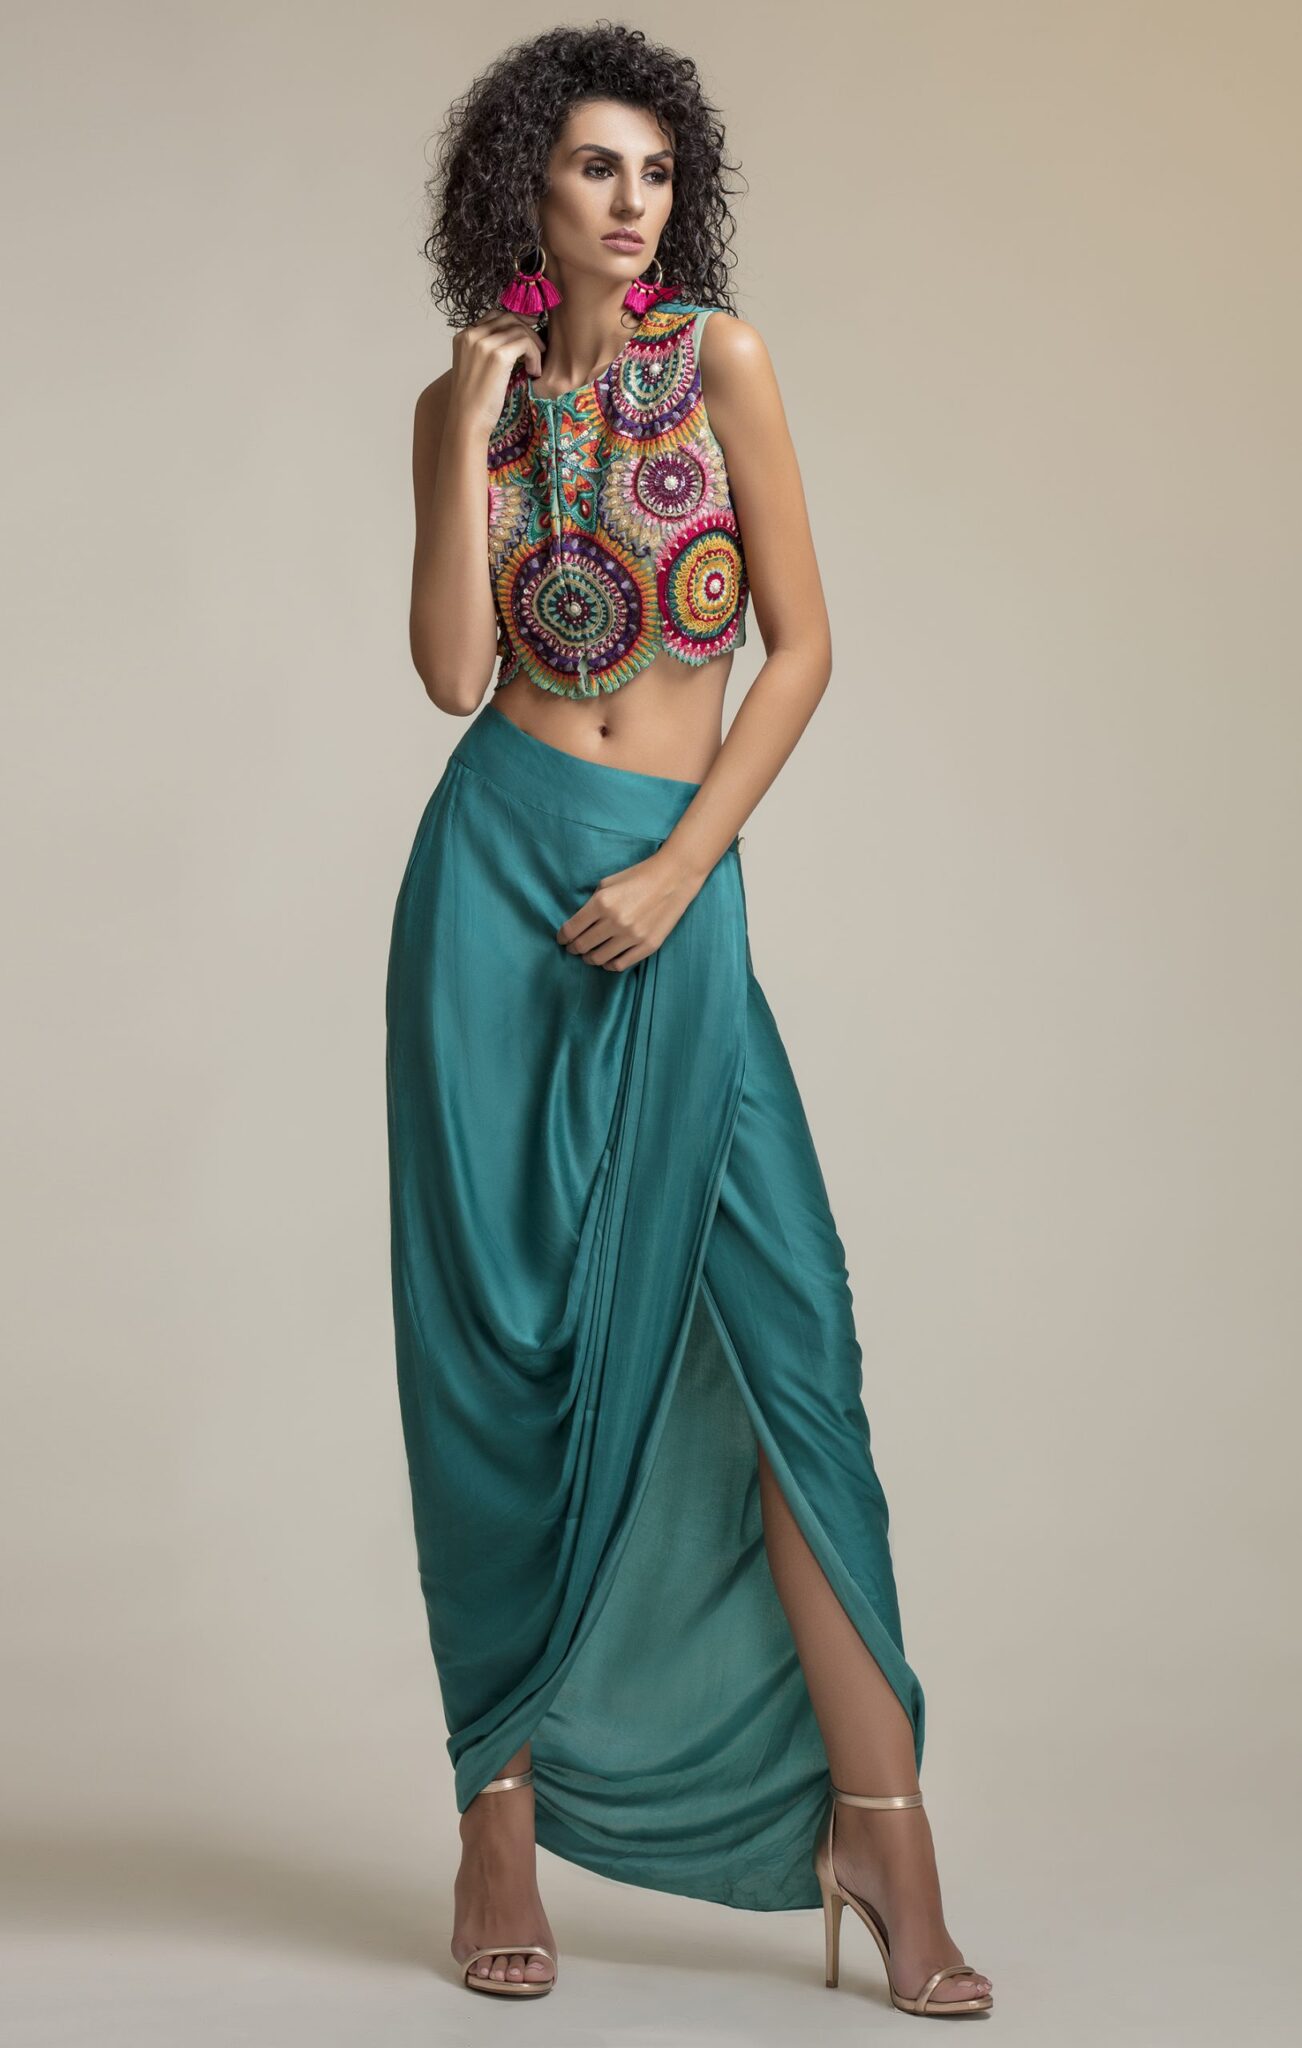 Embrace the Festivities in Style with Mandala Dresses and Festive Wear